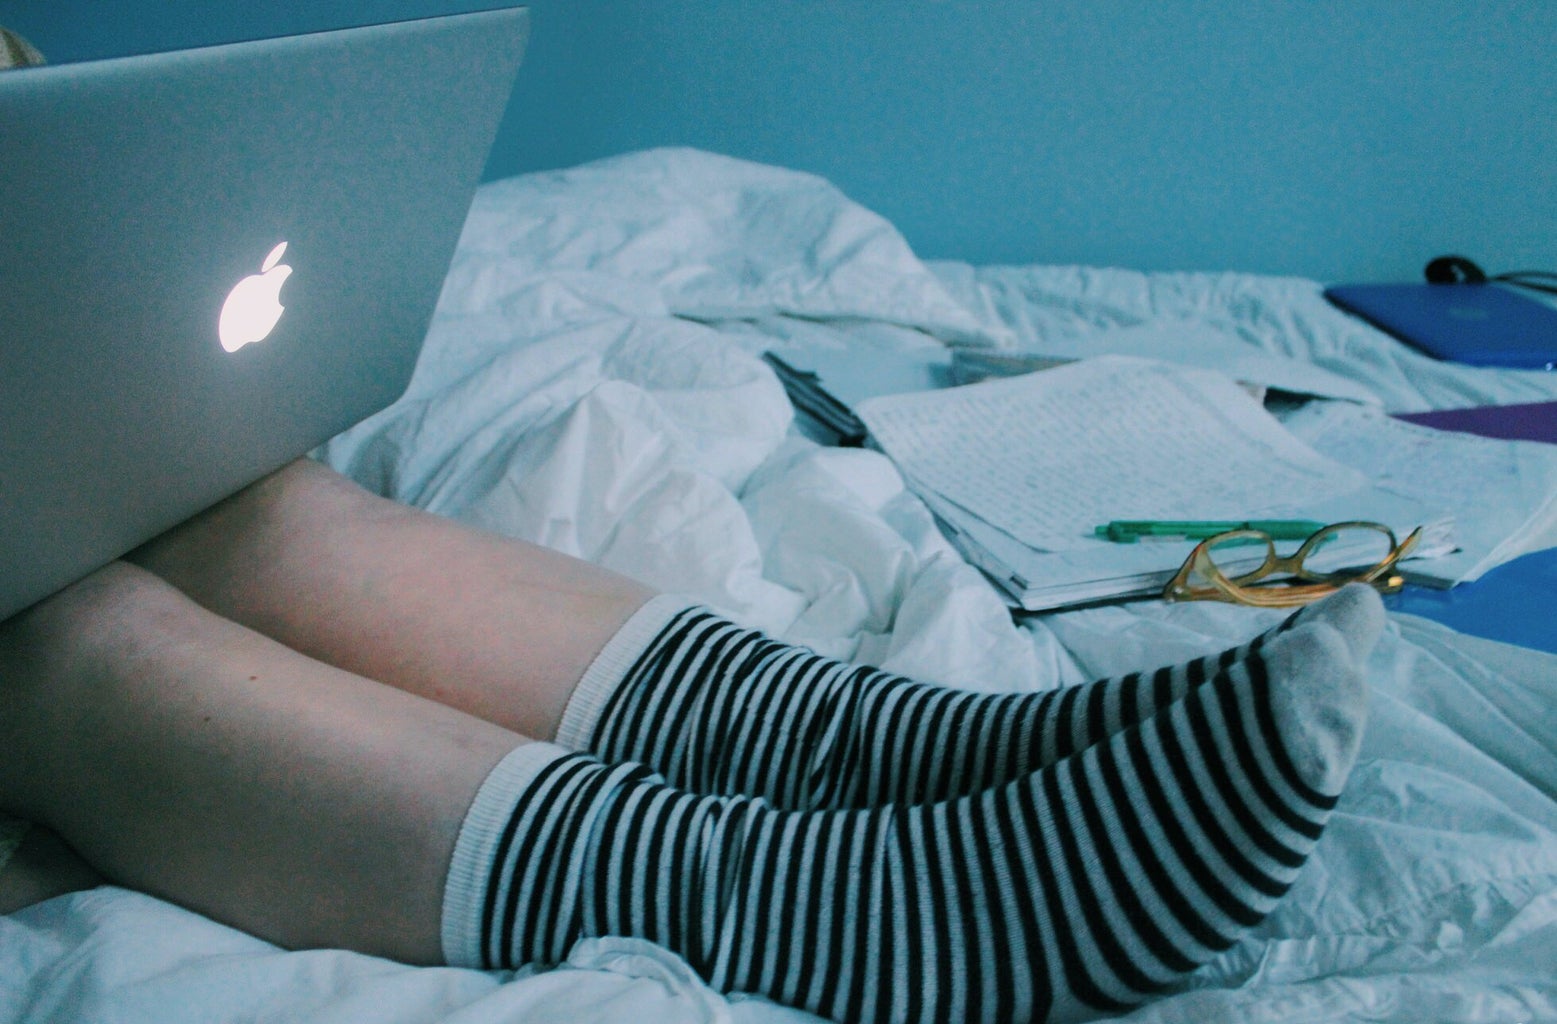 Anna Schultz-Socks And Laptop In Bed